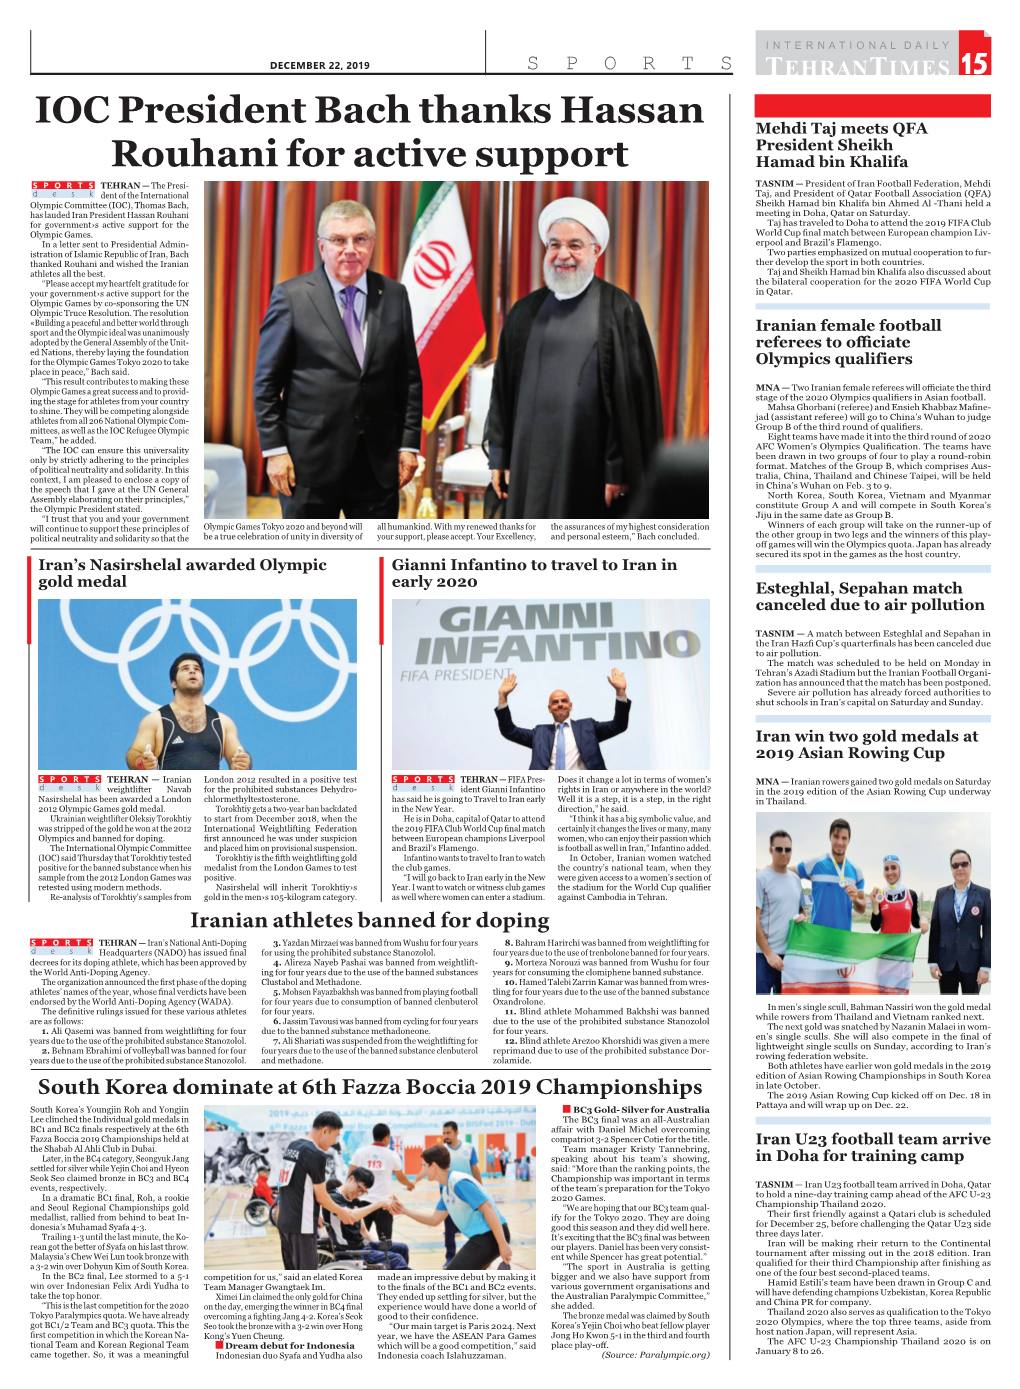 IOC President Bach Thanks Hassan Rouhani for Active Support